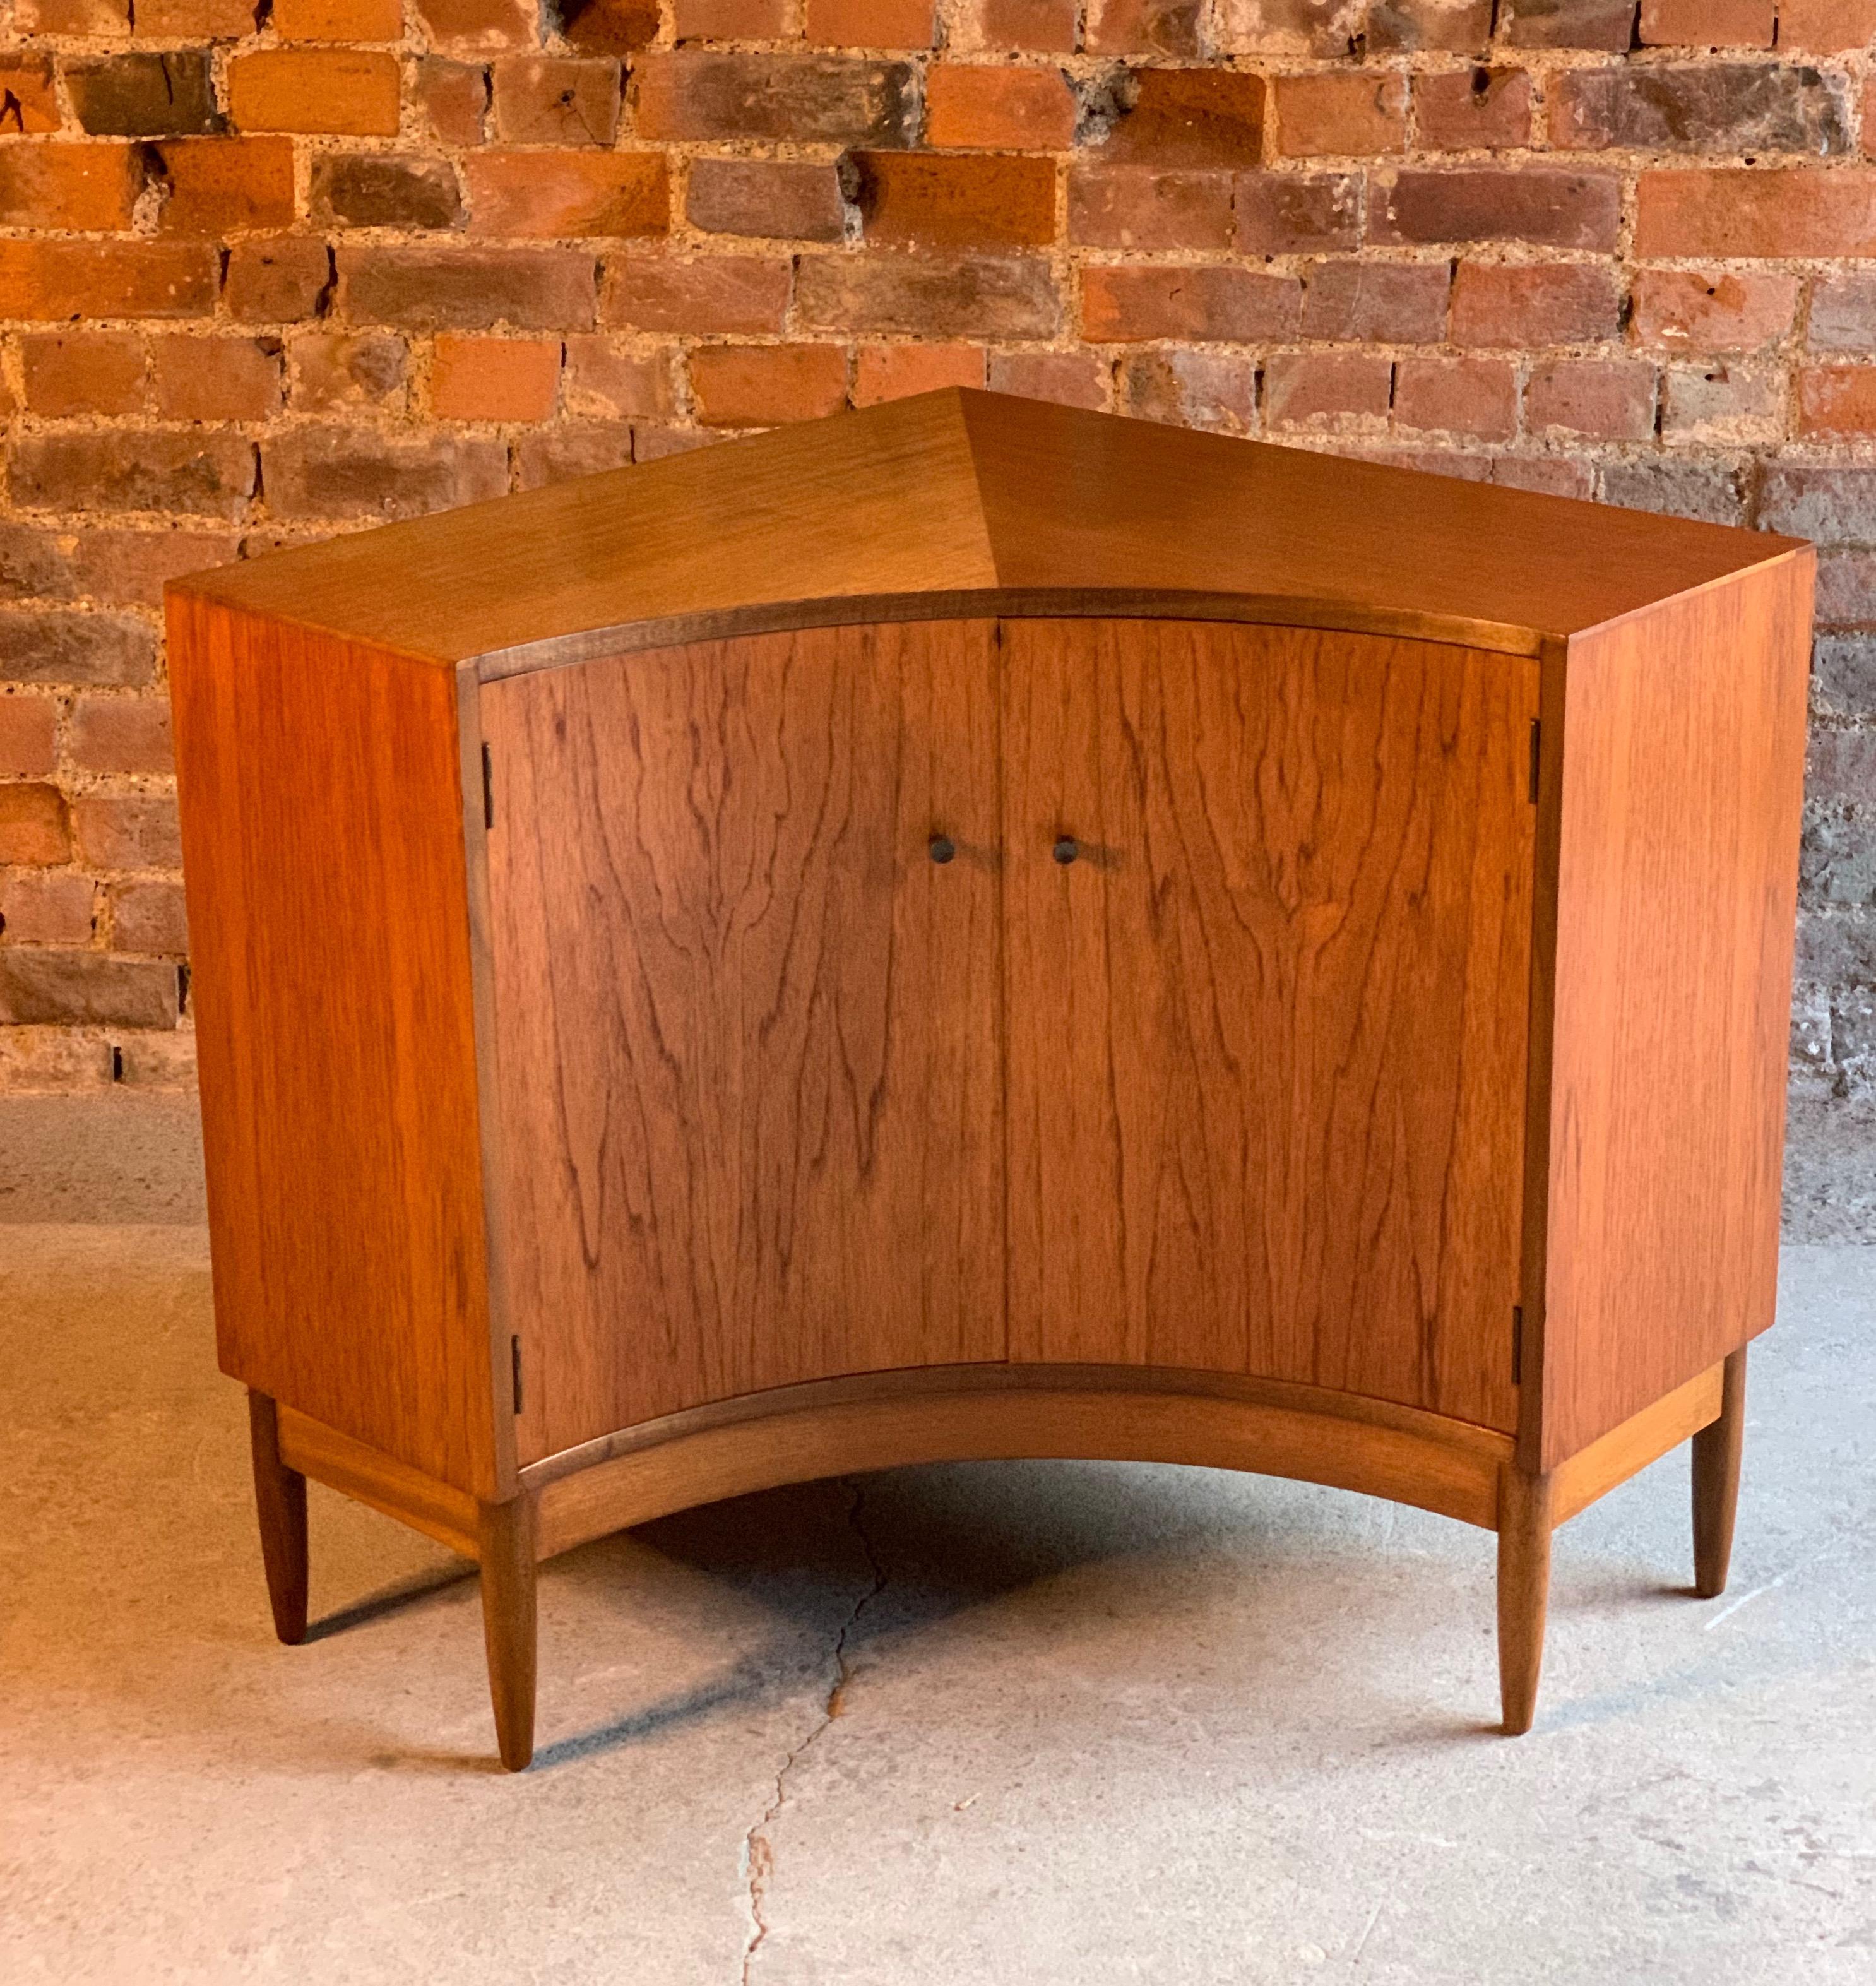 Magnificent midcentury Greaves & Thomas African teak corner cupboard or sideboard, the convex design saving wall space by utilizing corner space, thus giving maximum room to limited spaces, the triangular top over two cupboard doors with internal